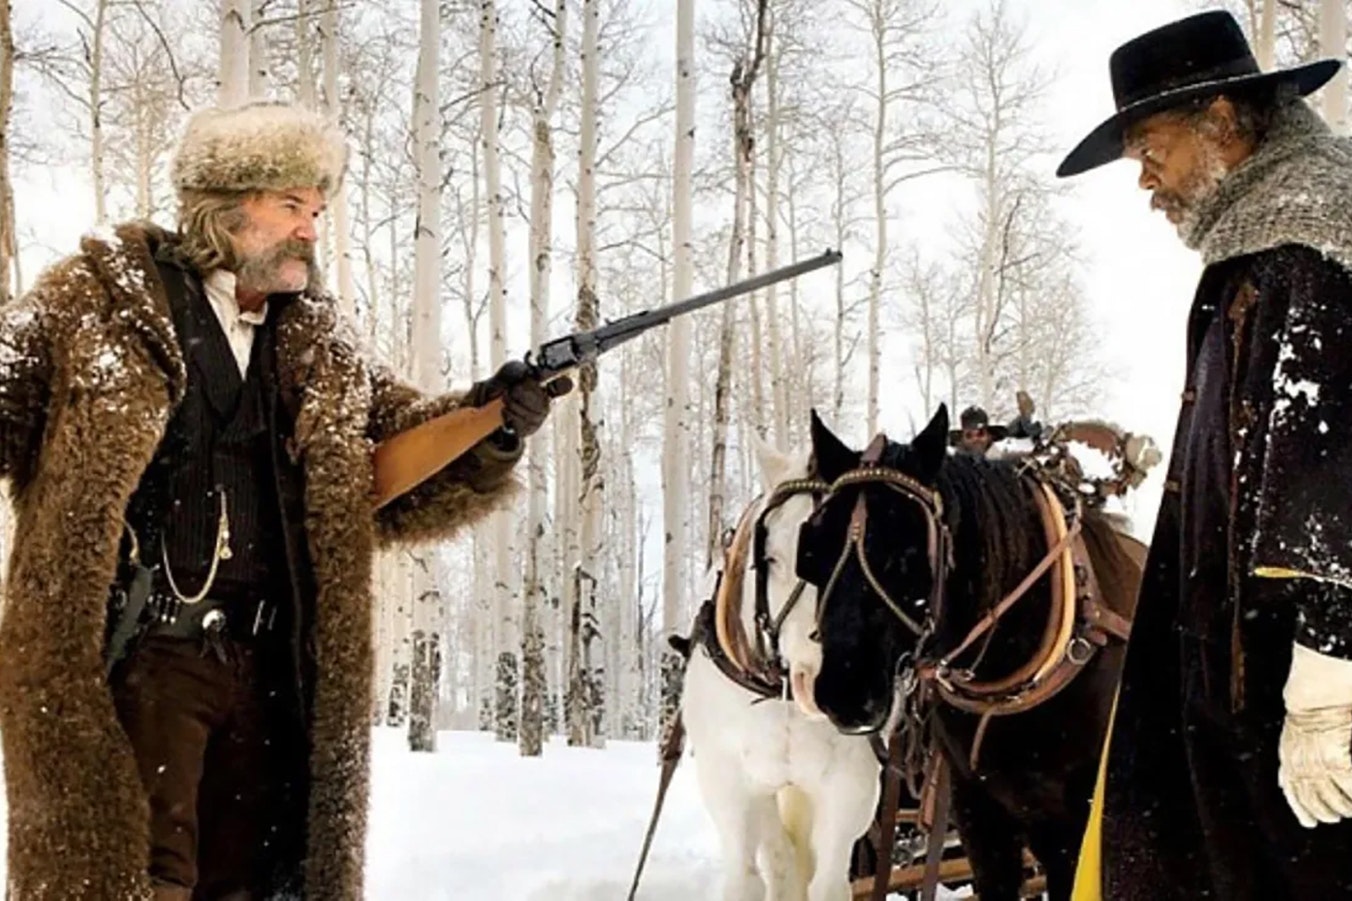 The unique and authentic buffalo hide coats worn by actors in "The Hateful Eight" were made by Merlin Heinze at Merlin's Hide Out in Thermopolis, Wyoming.